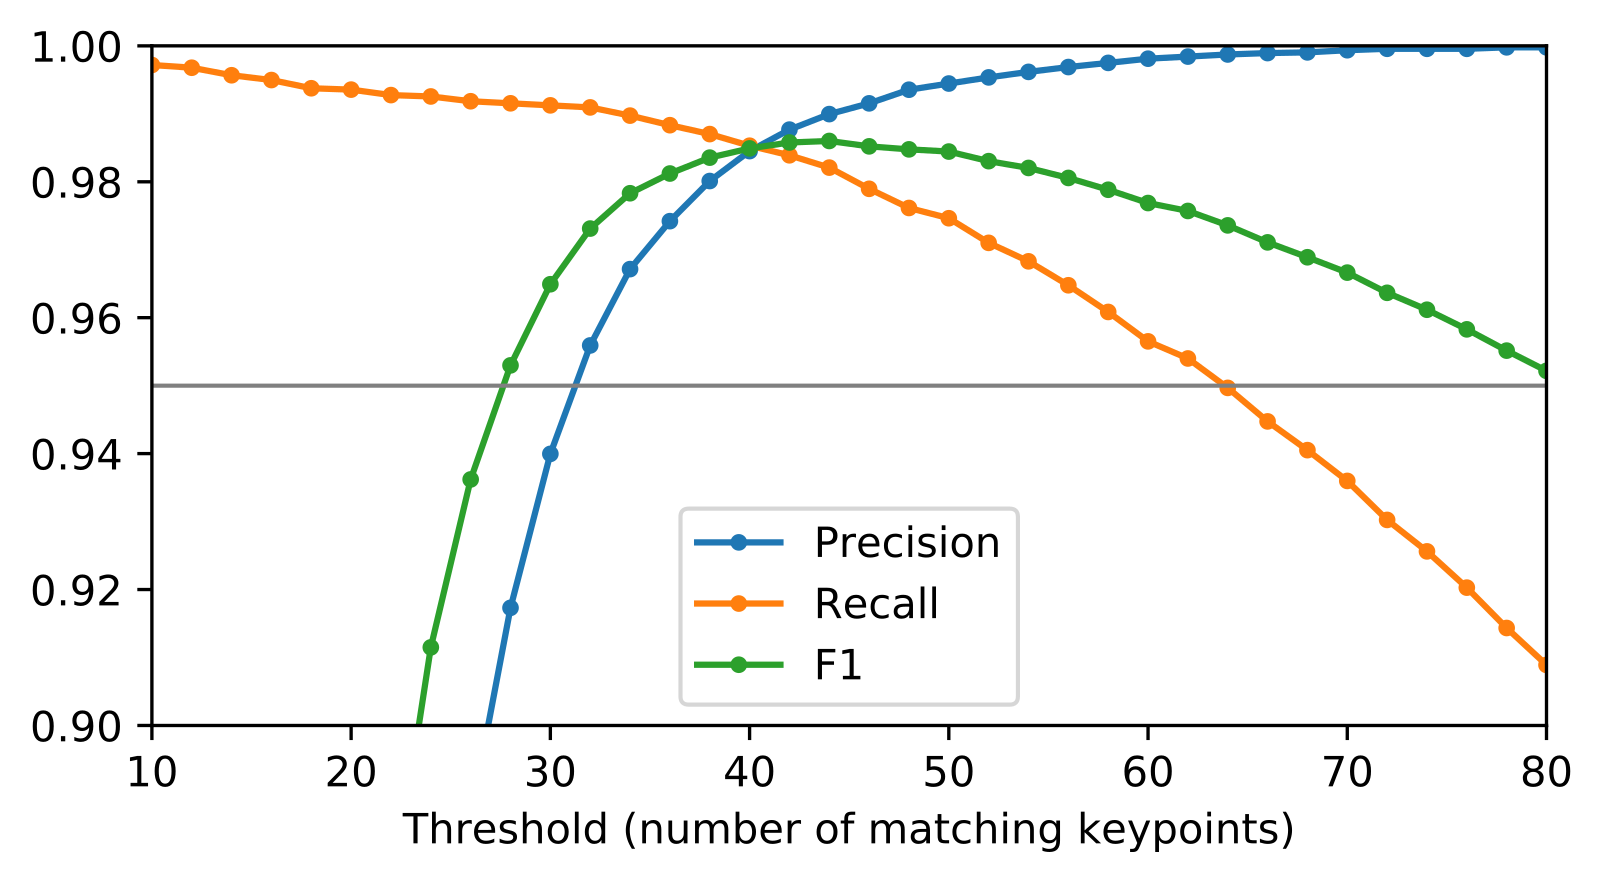 Fig. 3: Applying RANSAC on the keypoint matches from AKAZE UPRIGHT results in better matching results: The F1 score—see figure 2 (a)—is above 0.95 for a wide range of thresholds up to 80, indicated by the grey horizontal line.